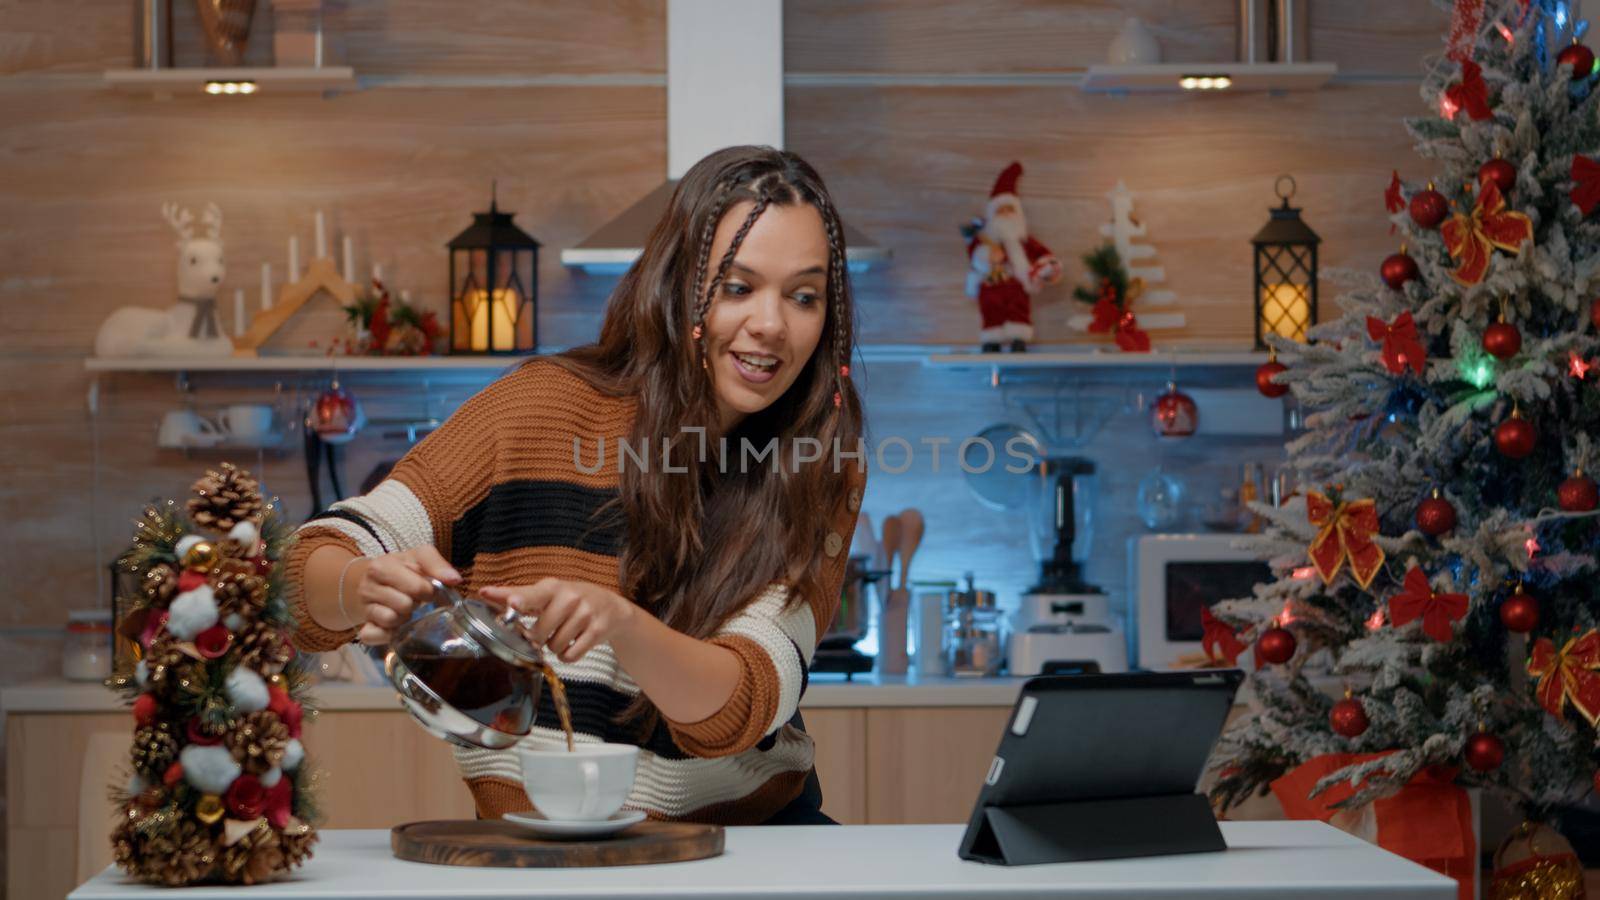 Woman pouring coffee while chatting on video call using tablet. Young adult preparing for festive christmas celebration in kitchen decorated with winter ornaments for seasonal festivity